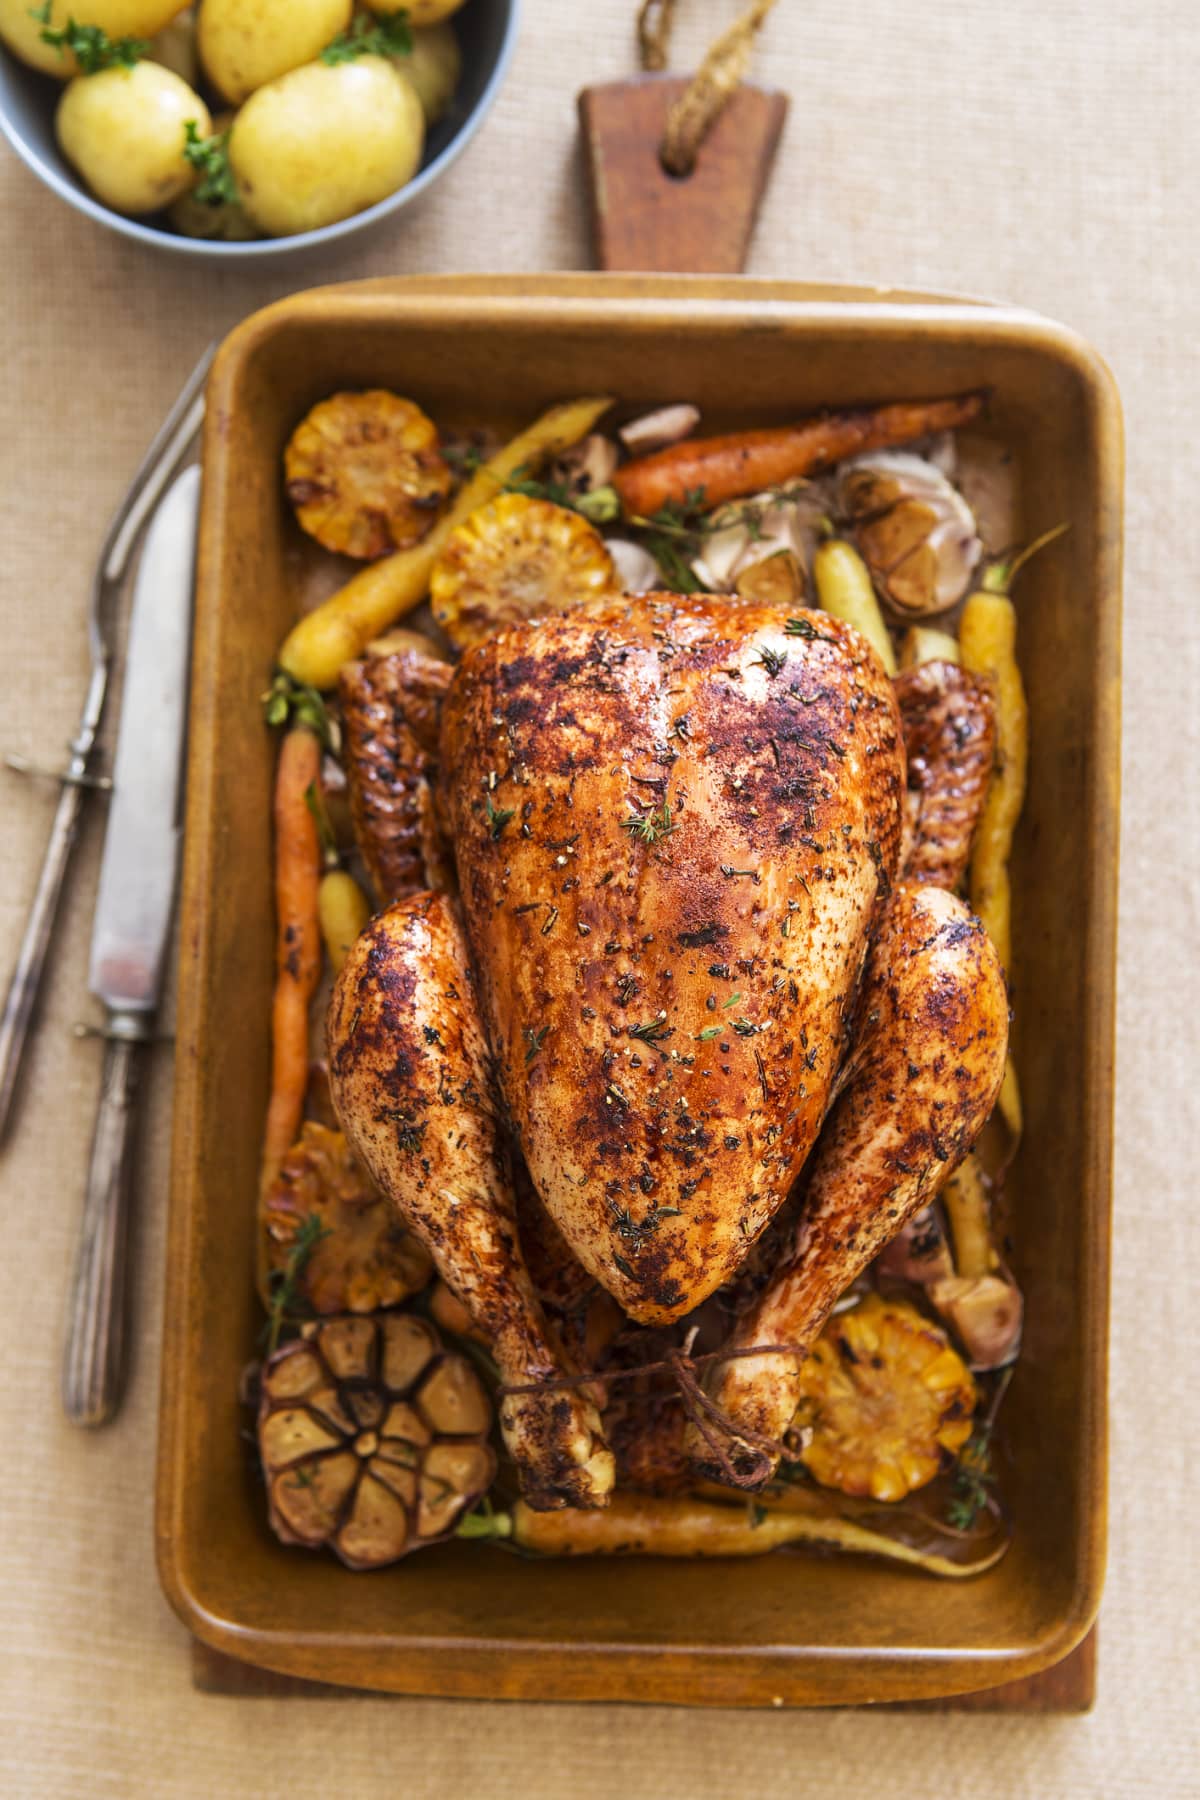 Roasted whole chicken in pan with carrots and mushroom